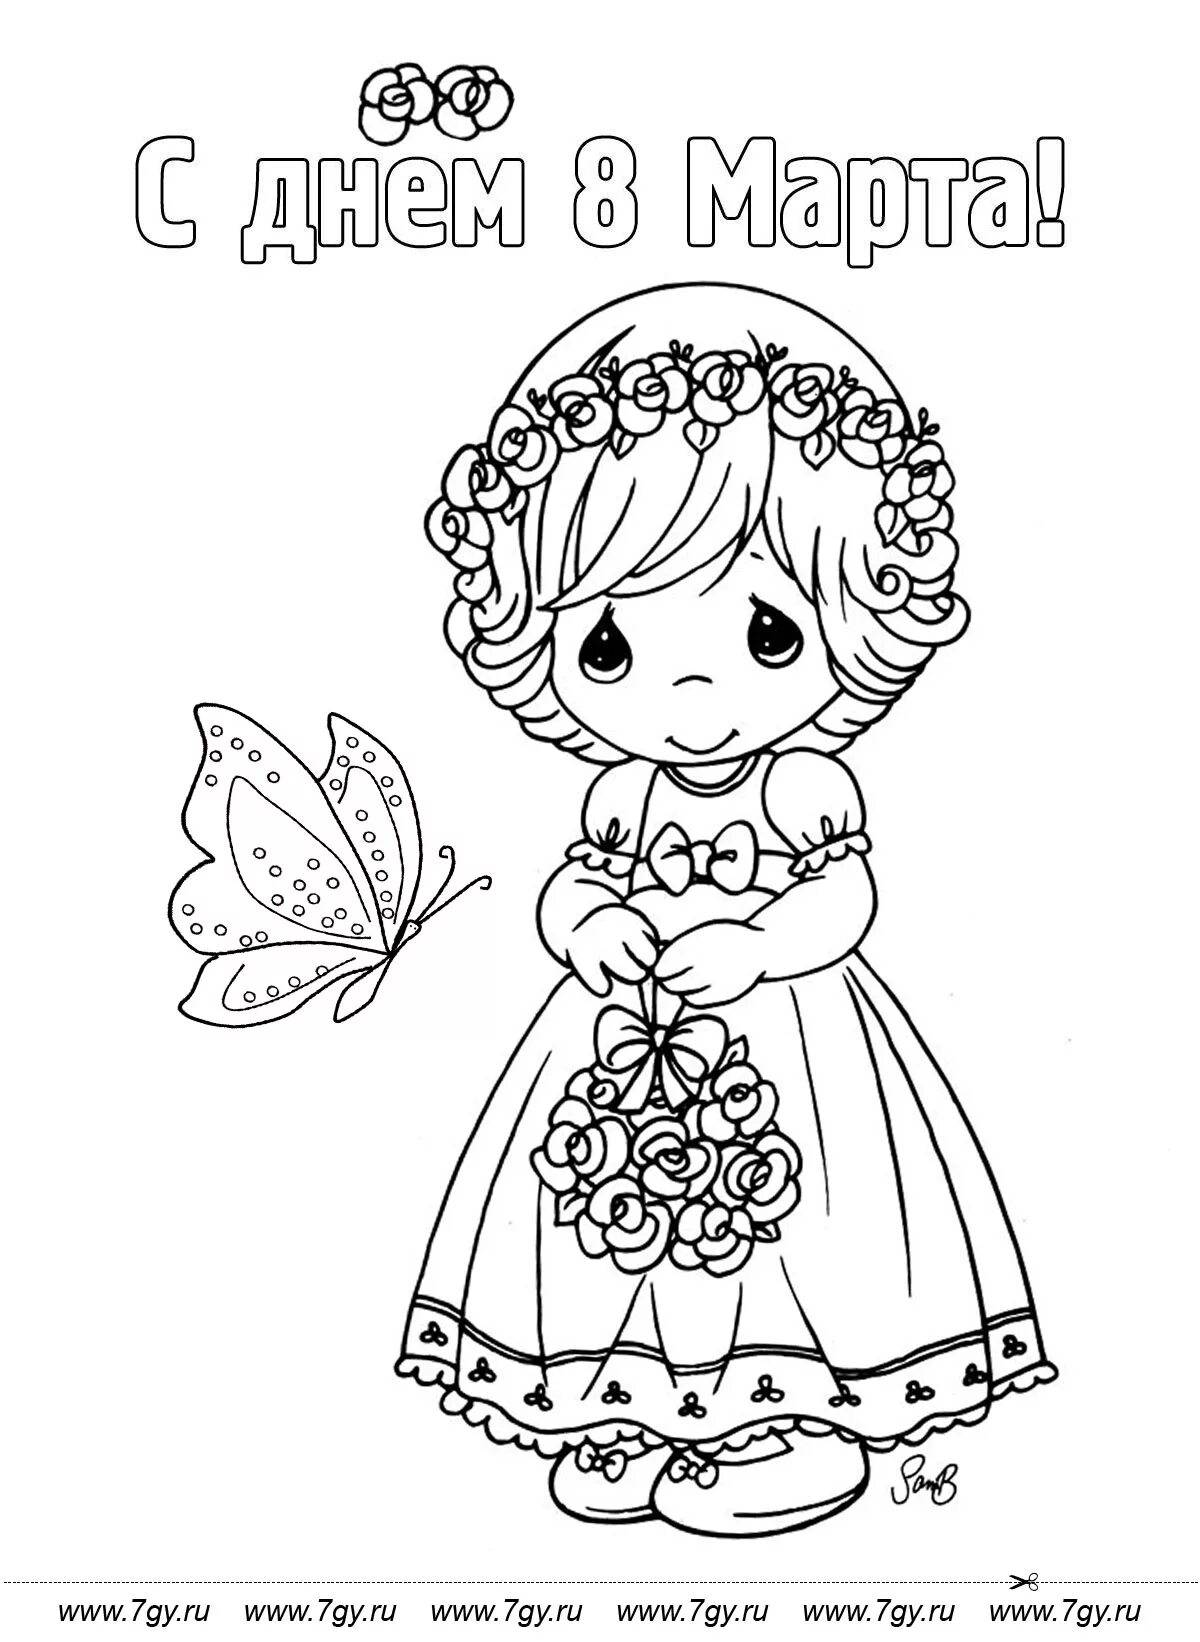 A fascinating coloring book March 8 for children 7-8 years old